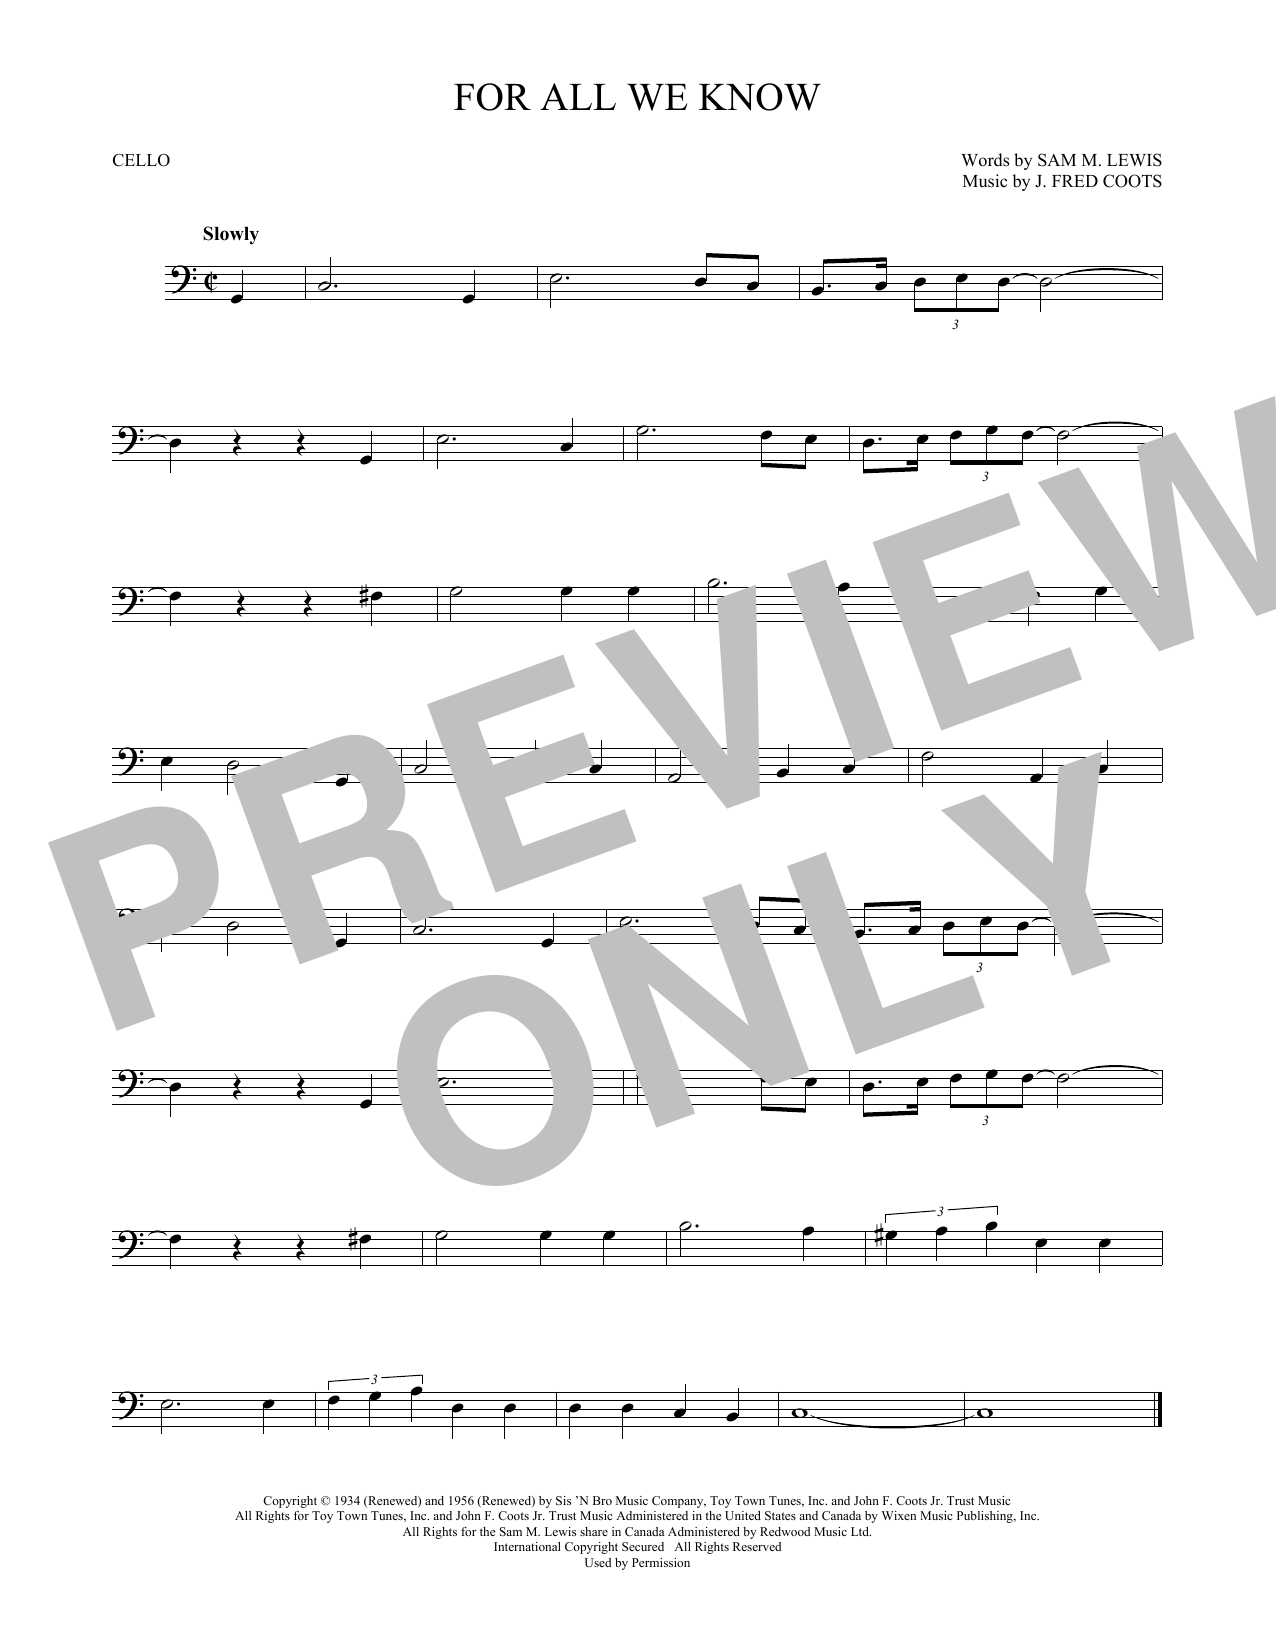 Download J. Fred Coots For All We Know Sheet Music